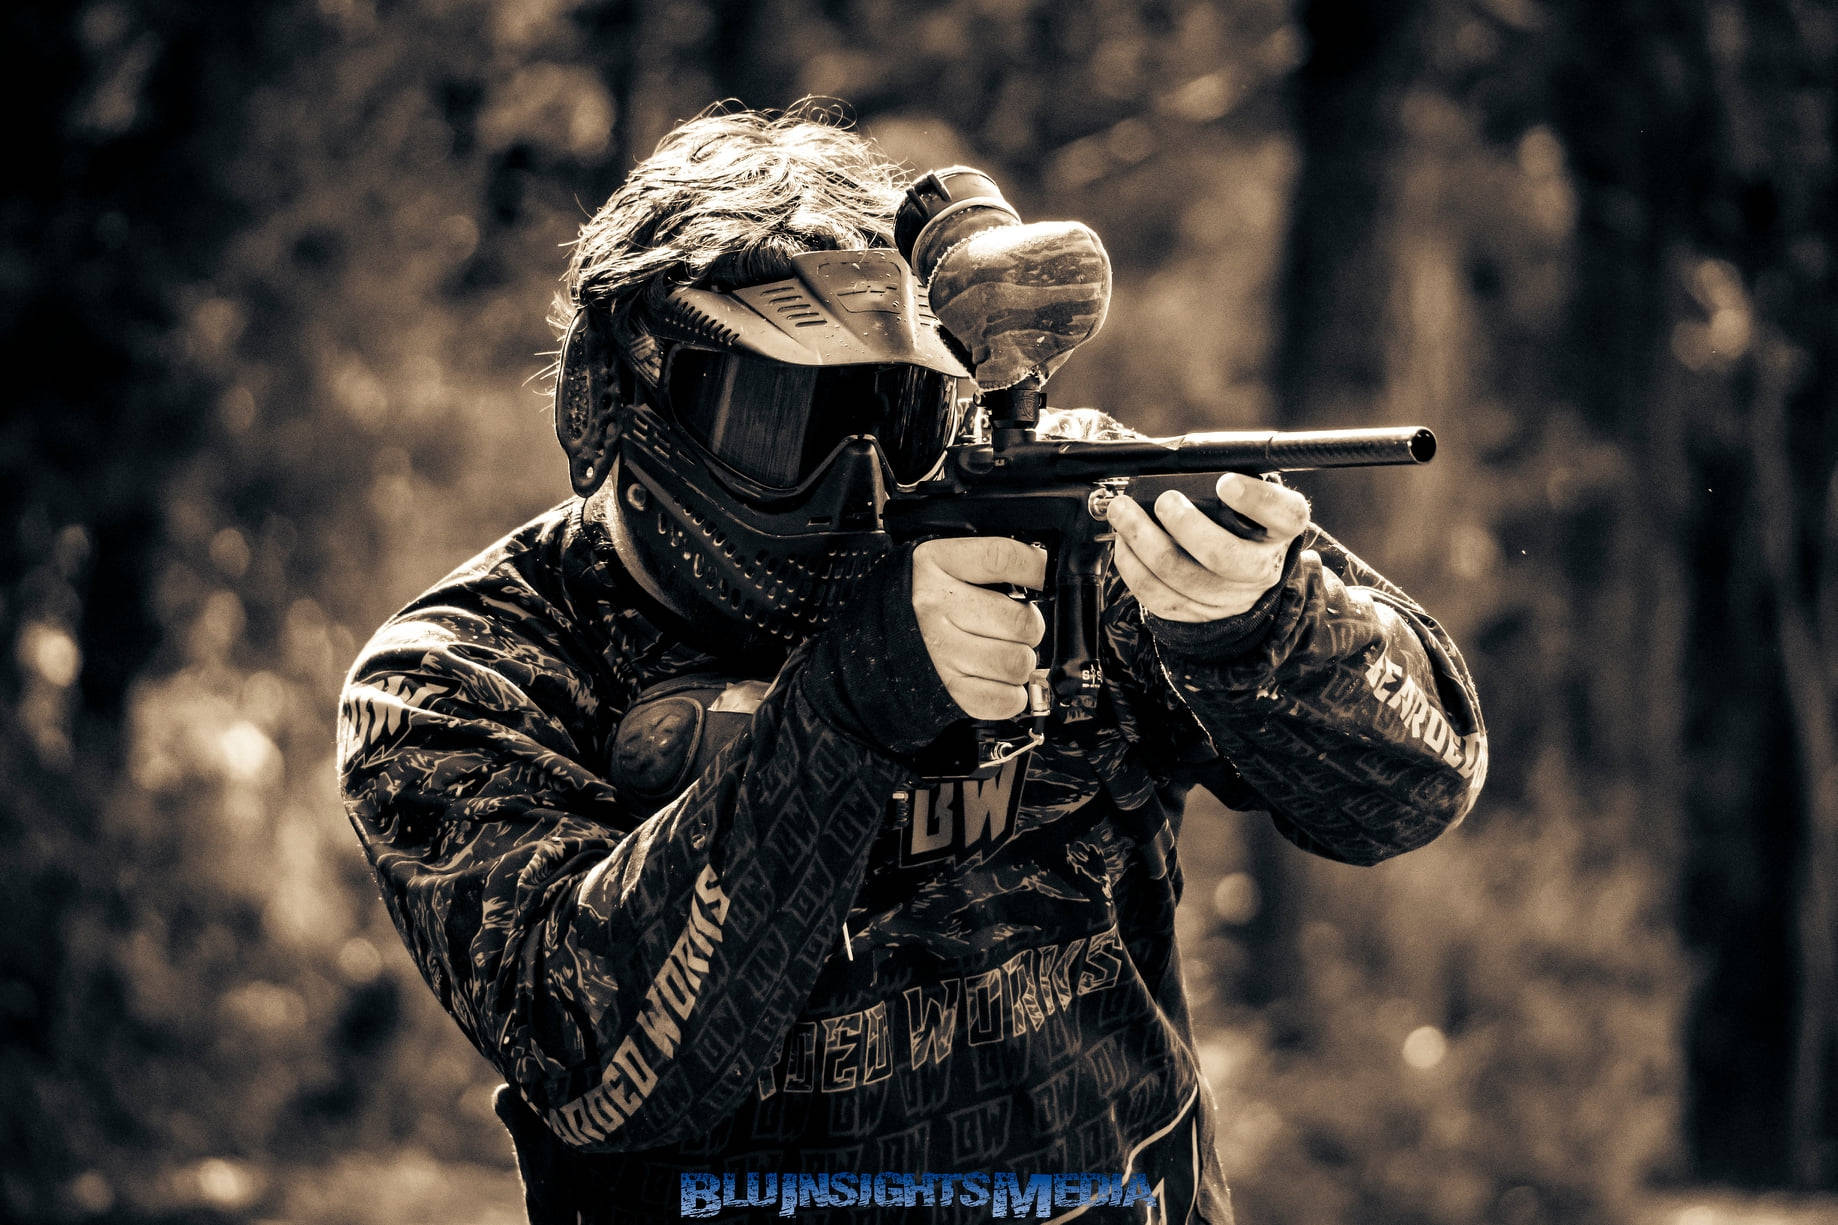 Download Paintball Player Aiming In the Woods Wallpaper | Wallpapers.com